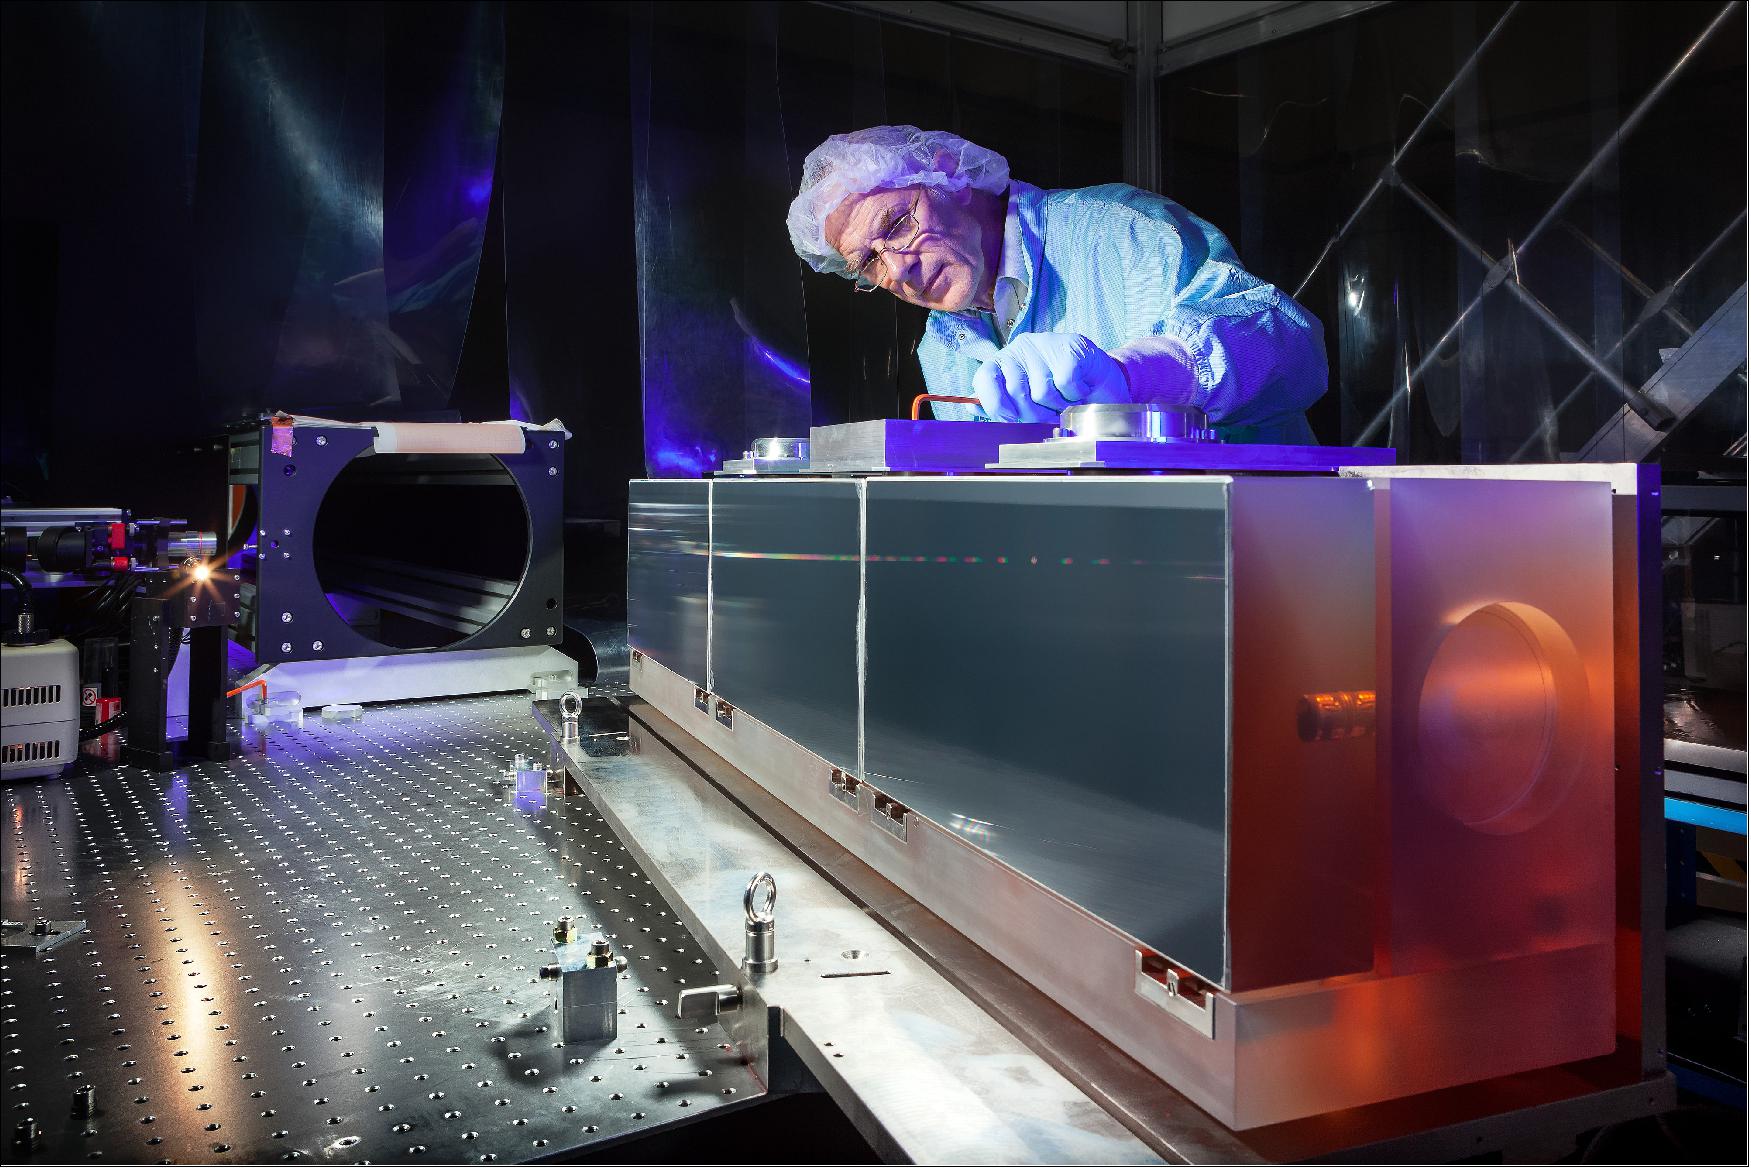 Figure 91: The huge diffraction grating at the heart of the ultra-precise ESPRESSO spectrograph — the next generation in exoplanet detection technology — is pictured undergoing testing in the cleanroom at ESO Headquarters in Garching, Germany (image credit: ESO, M. Zamani)